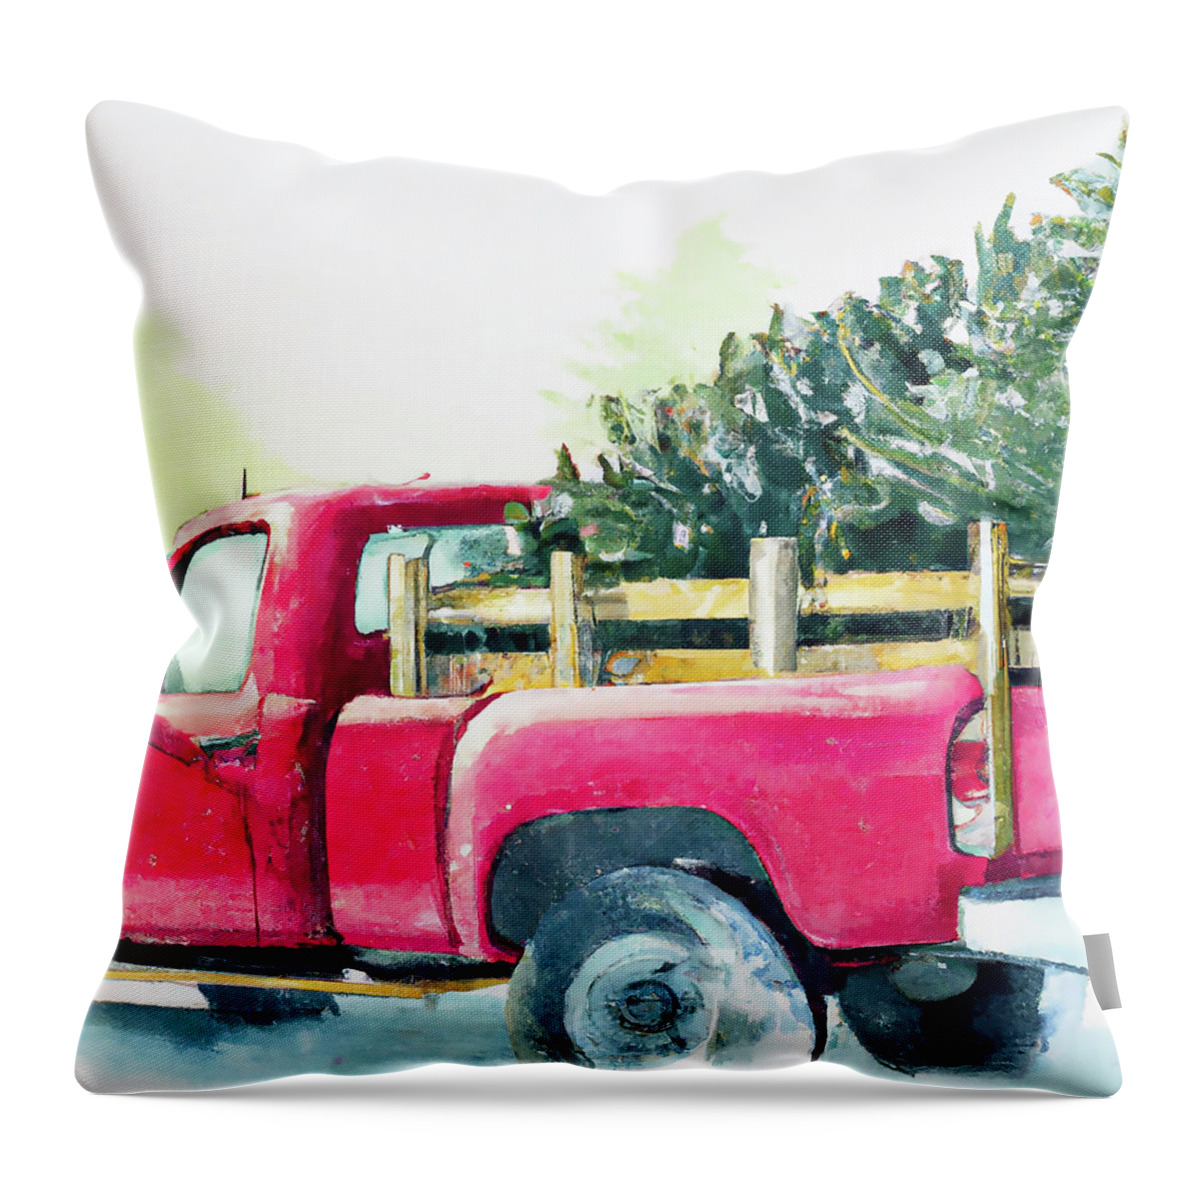 Red Truck Throw Pillow featuring the digital art Red Truck with Christmas Tree by Alison Frank